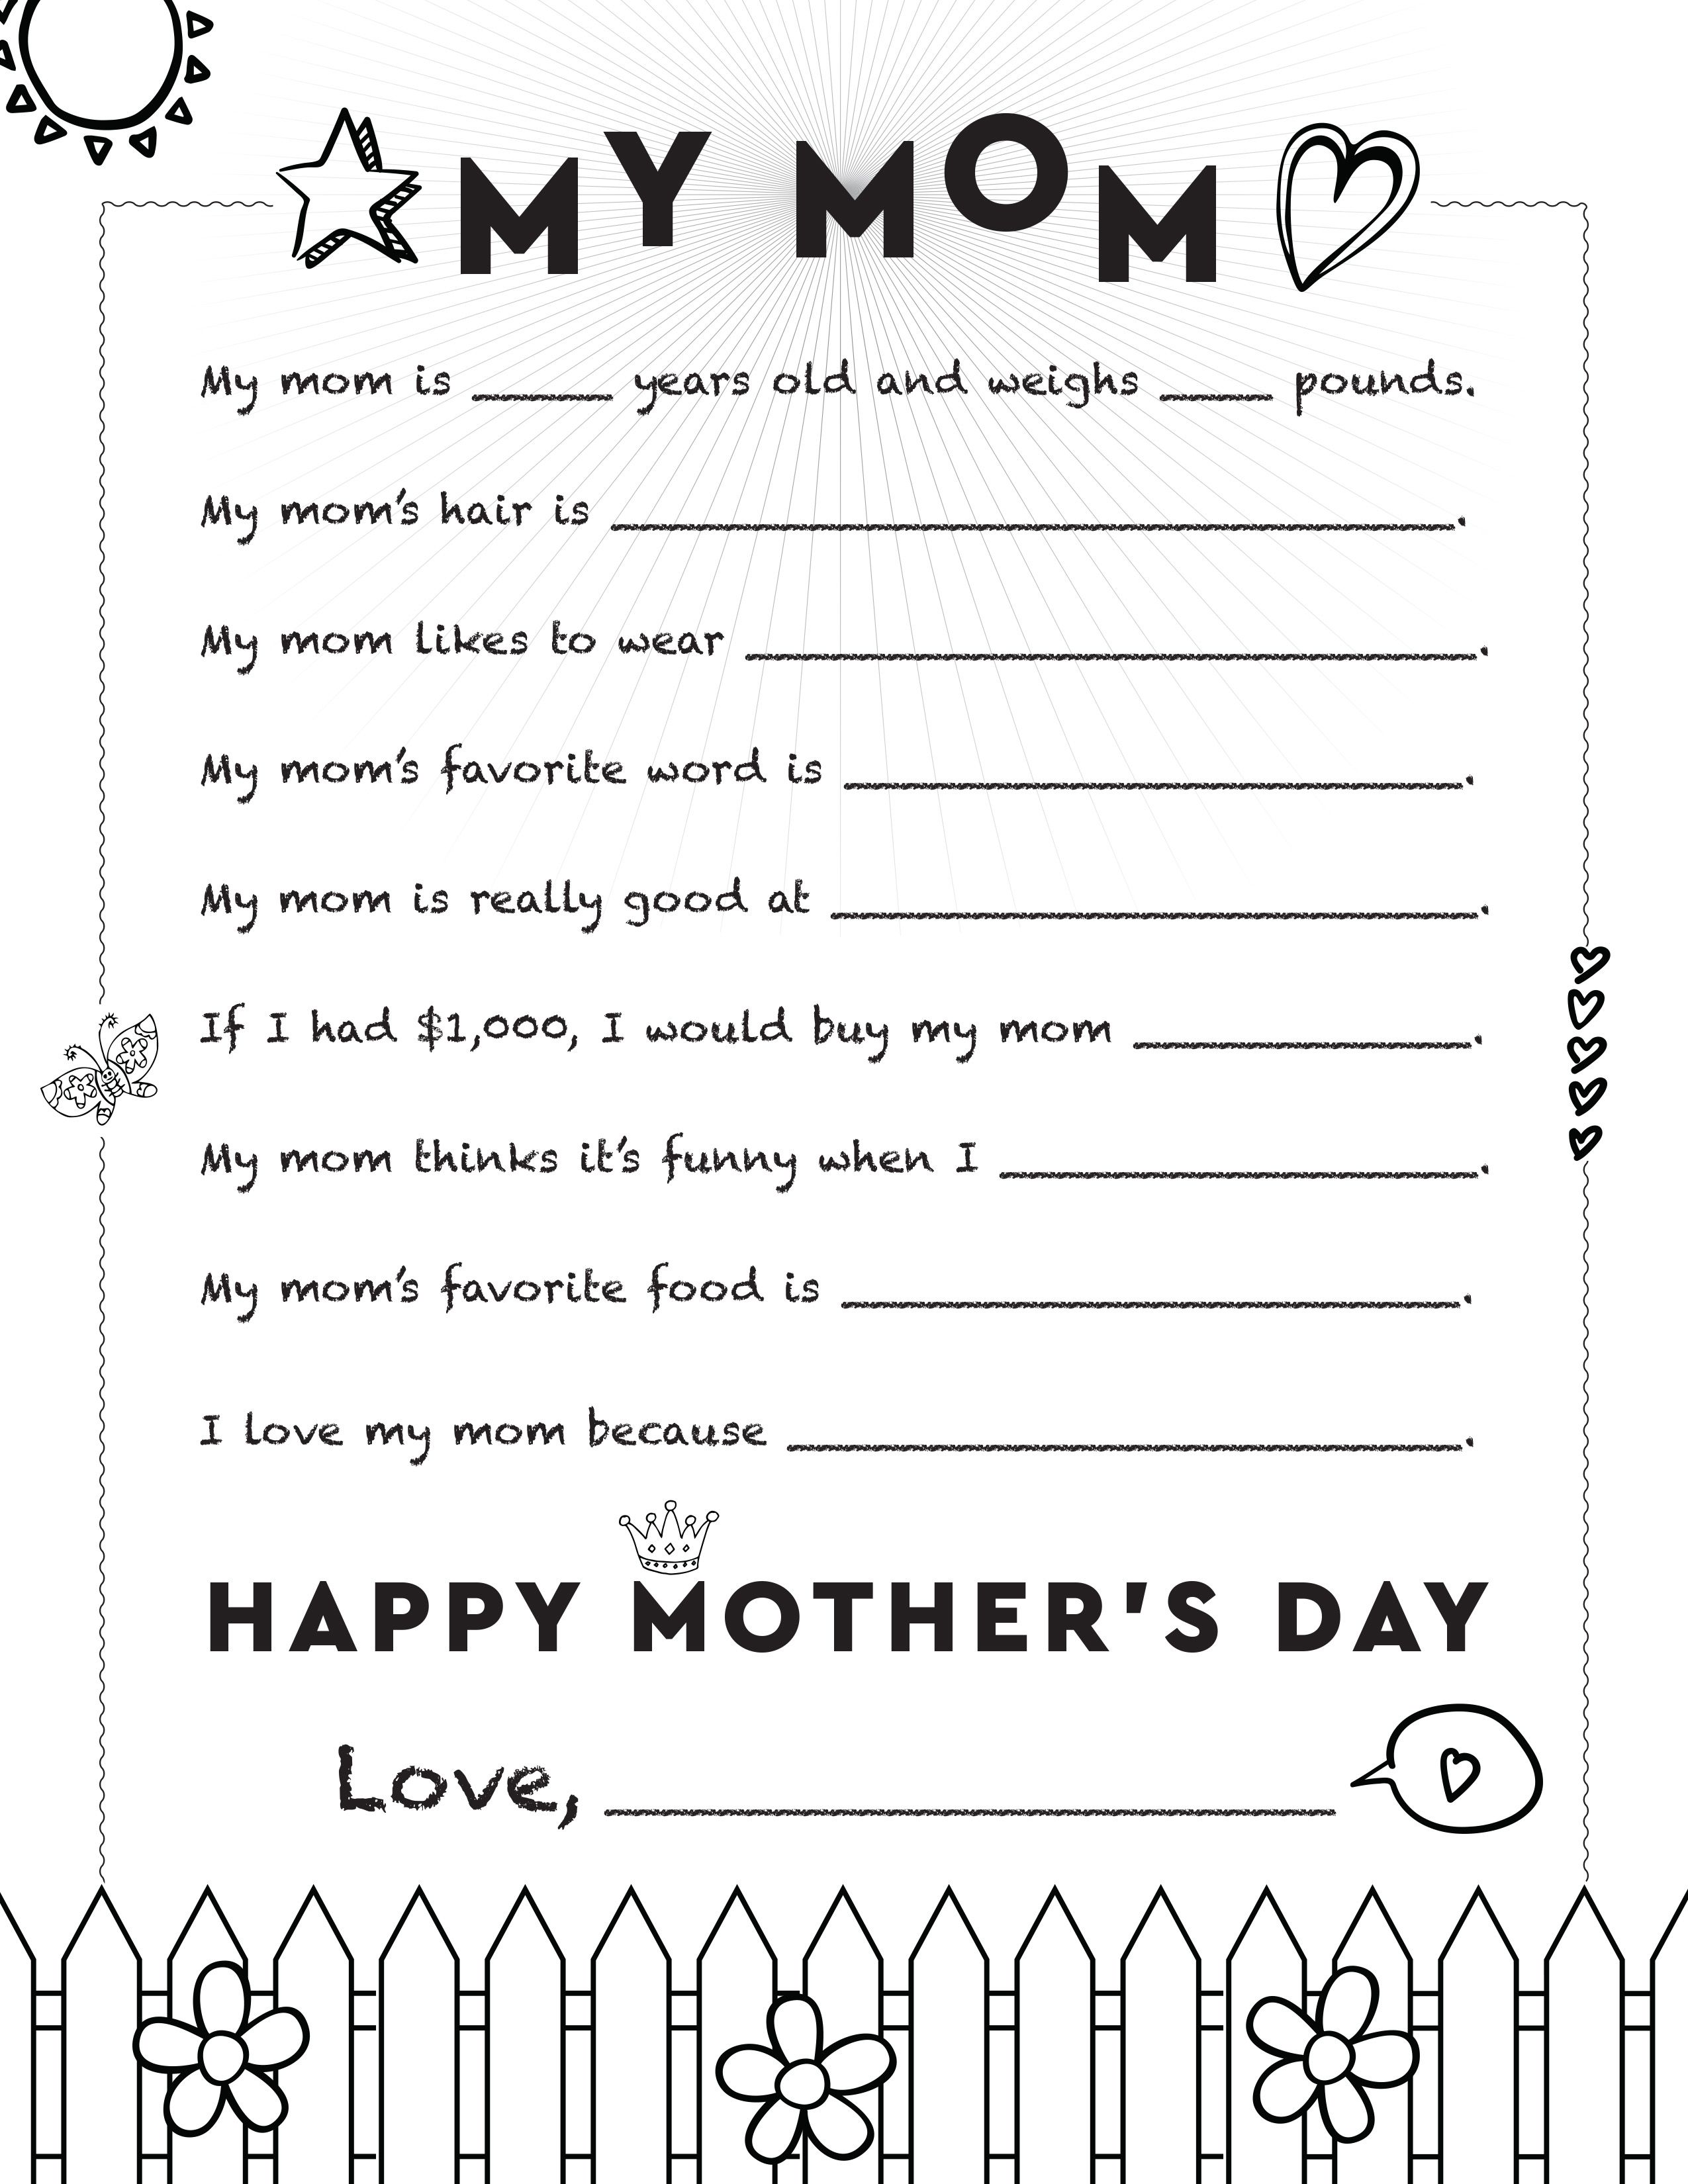 Free Printable What do you Love about Mom-to-be Cards